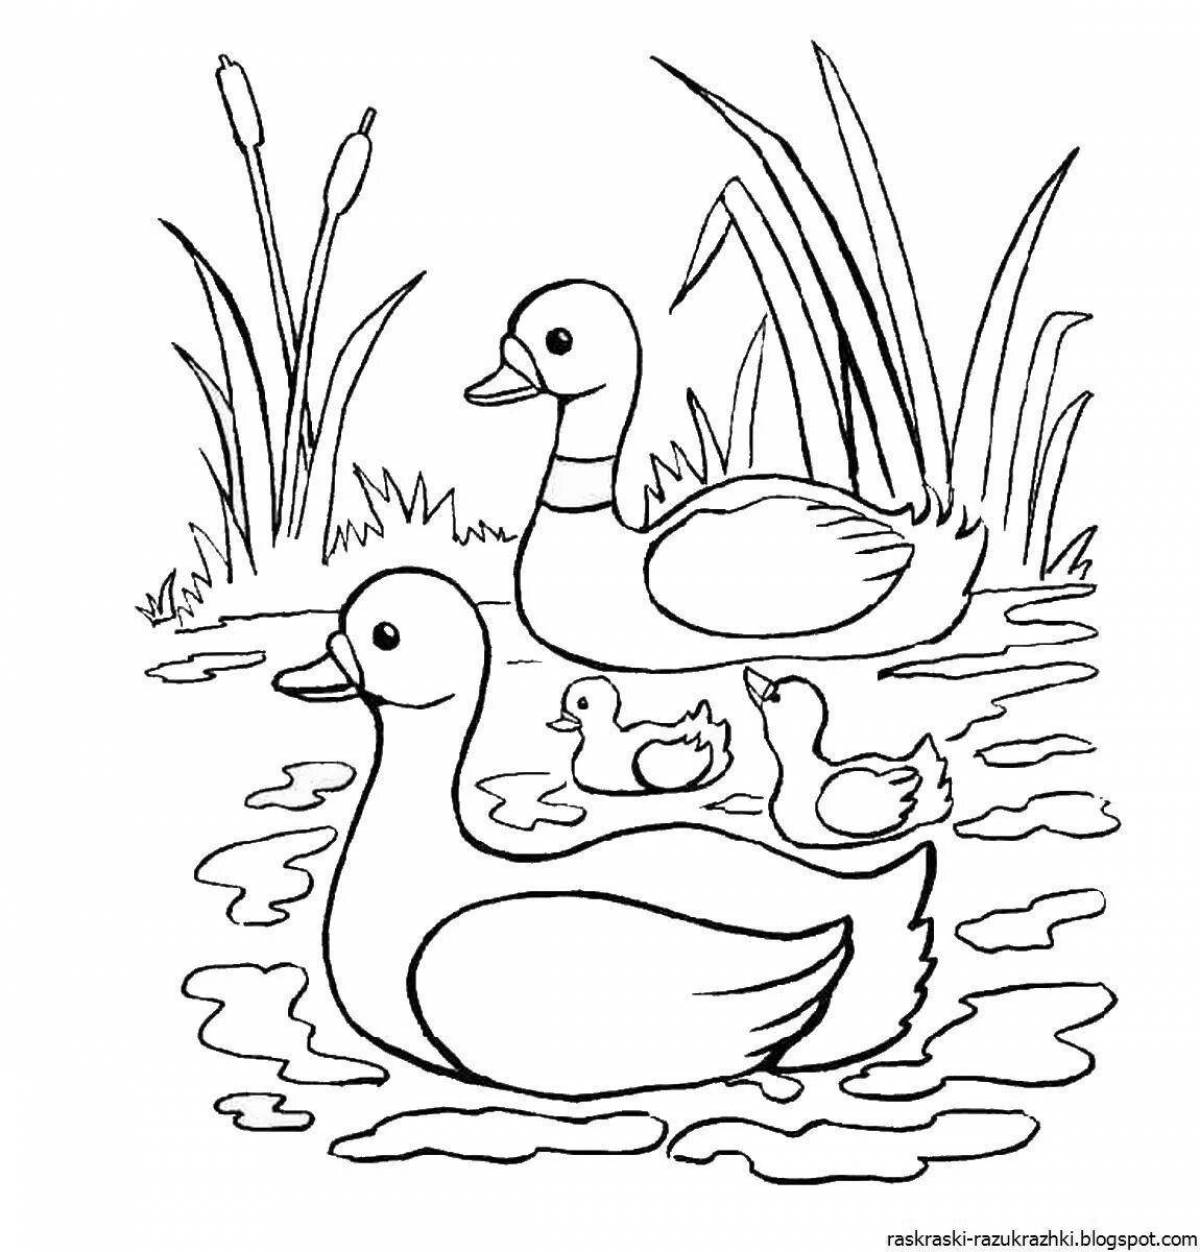 Playful bird coloring page for kids